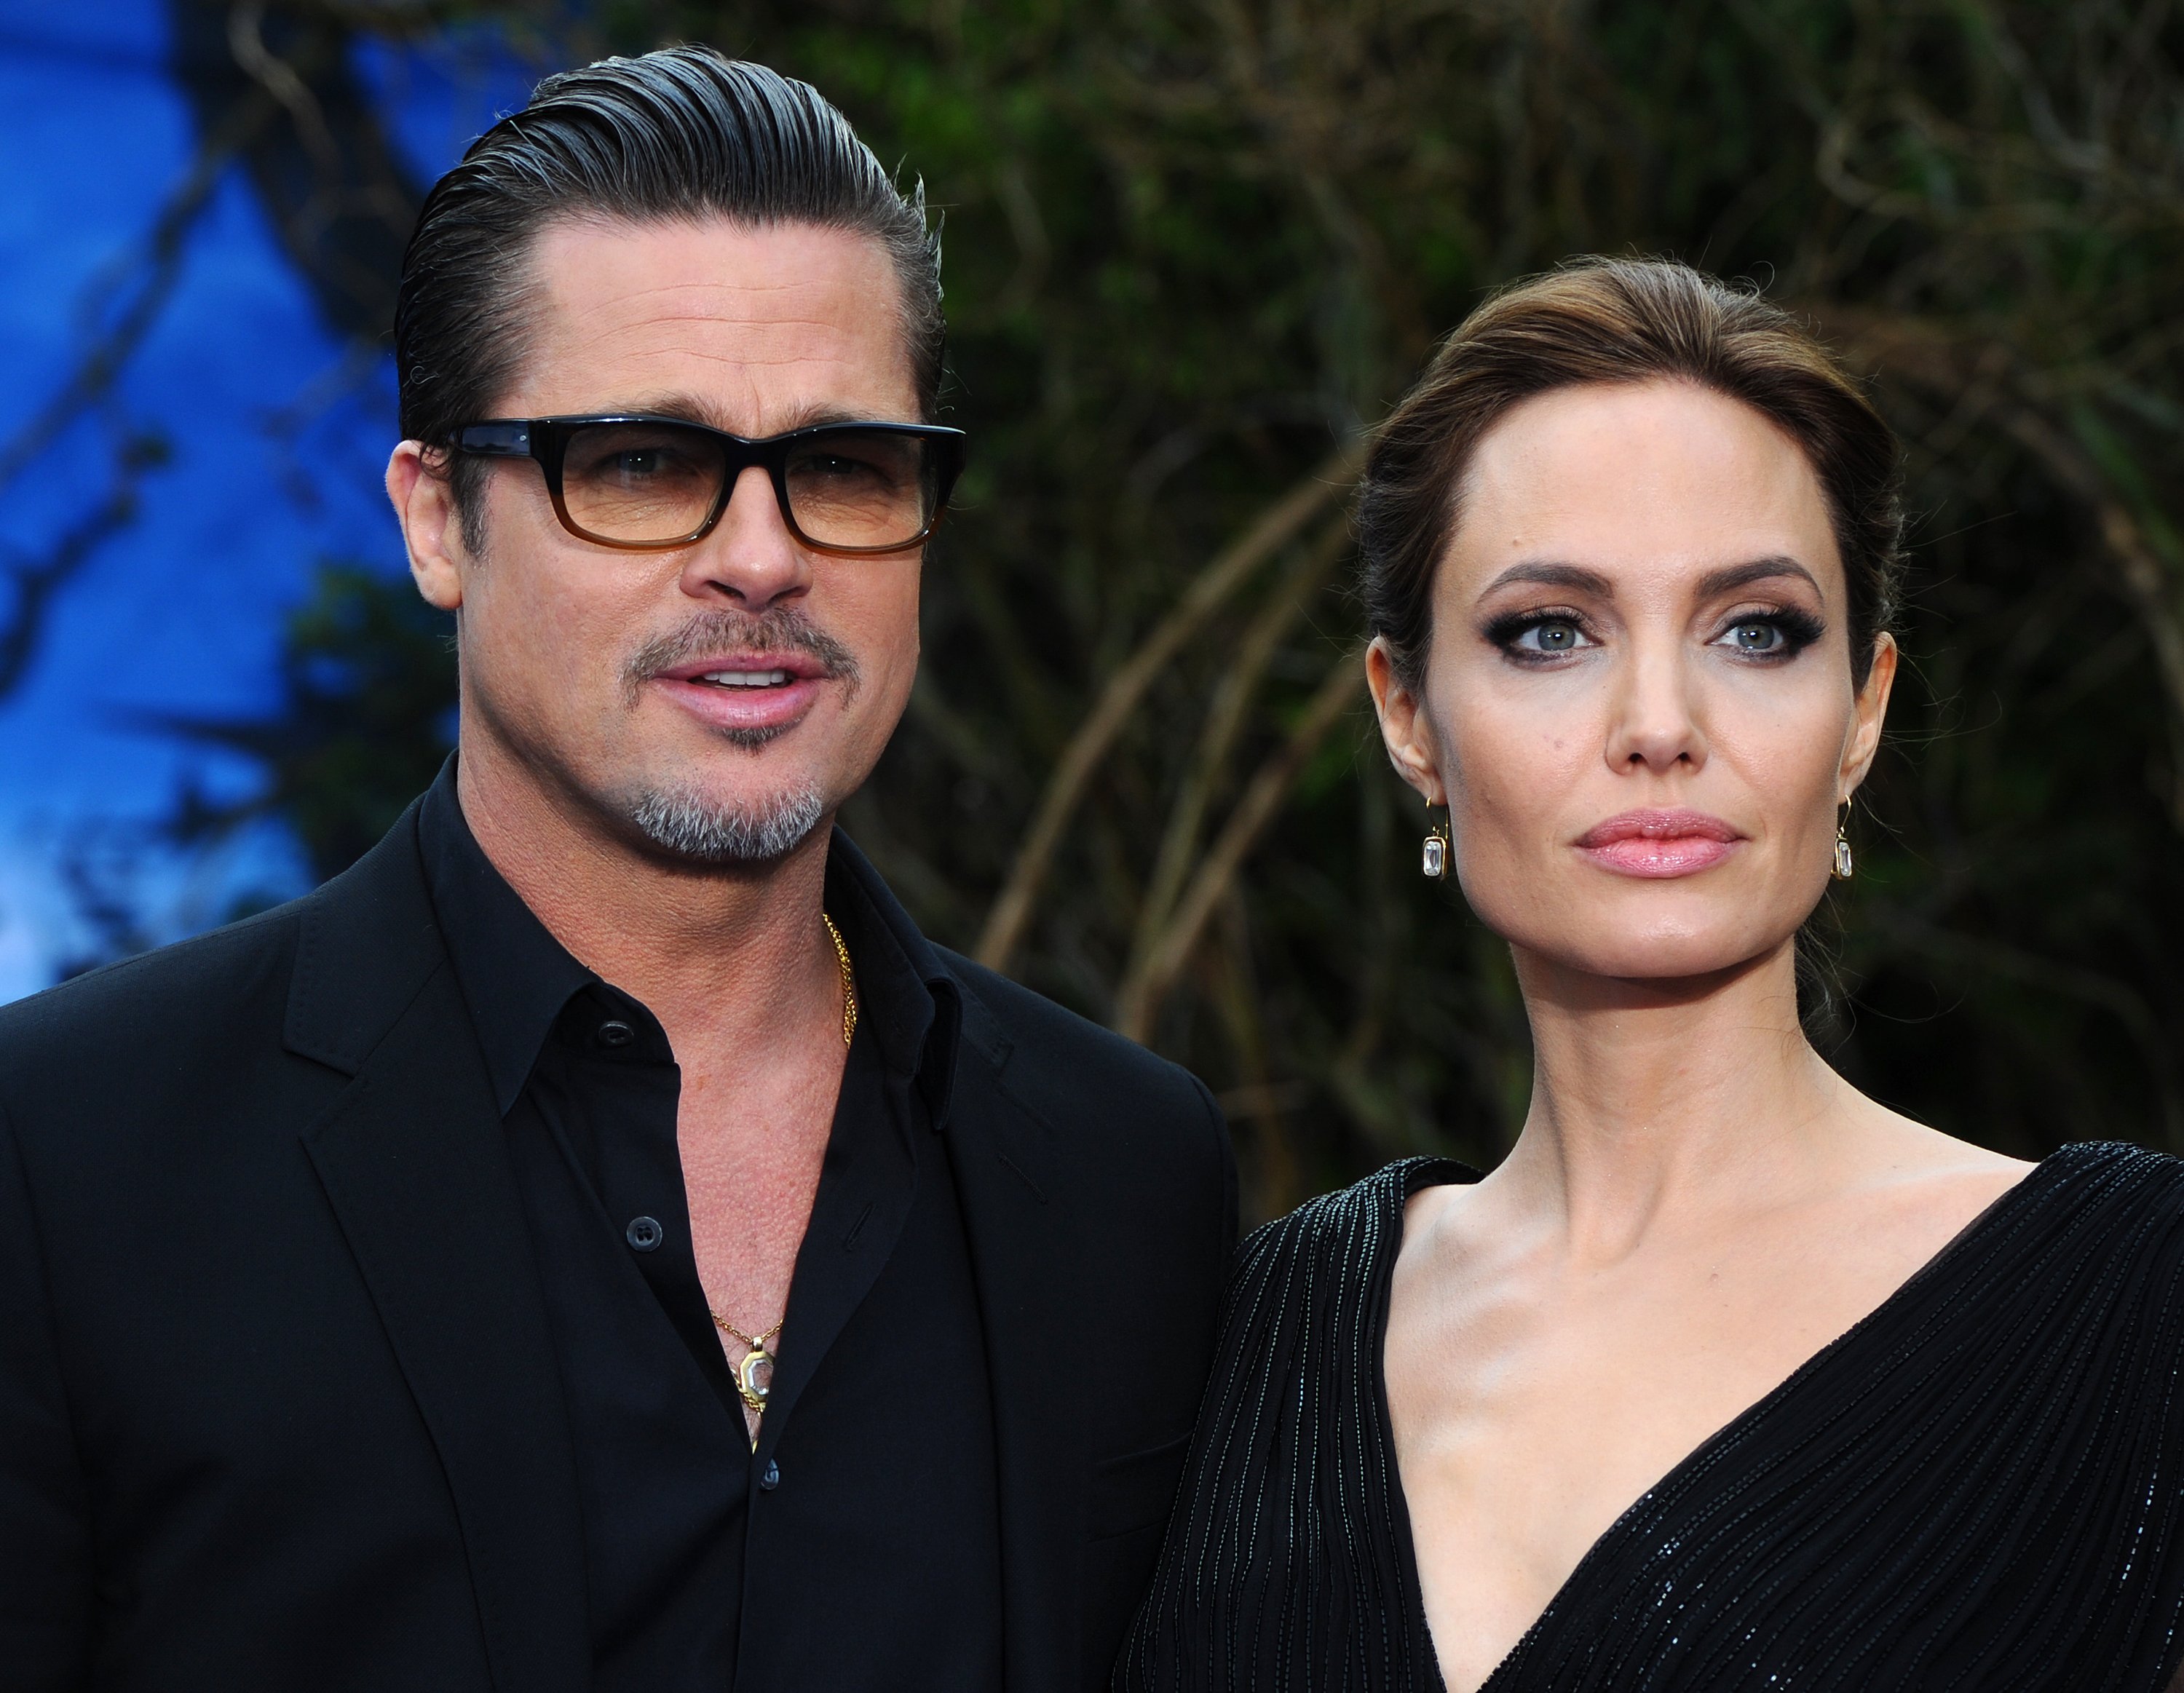 Brad Pitt and Angelina Jolie attend a reception for "Maleficent" in London, England on May 8, 2014 | Photo: Getty Images